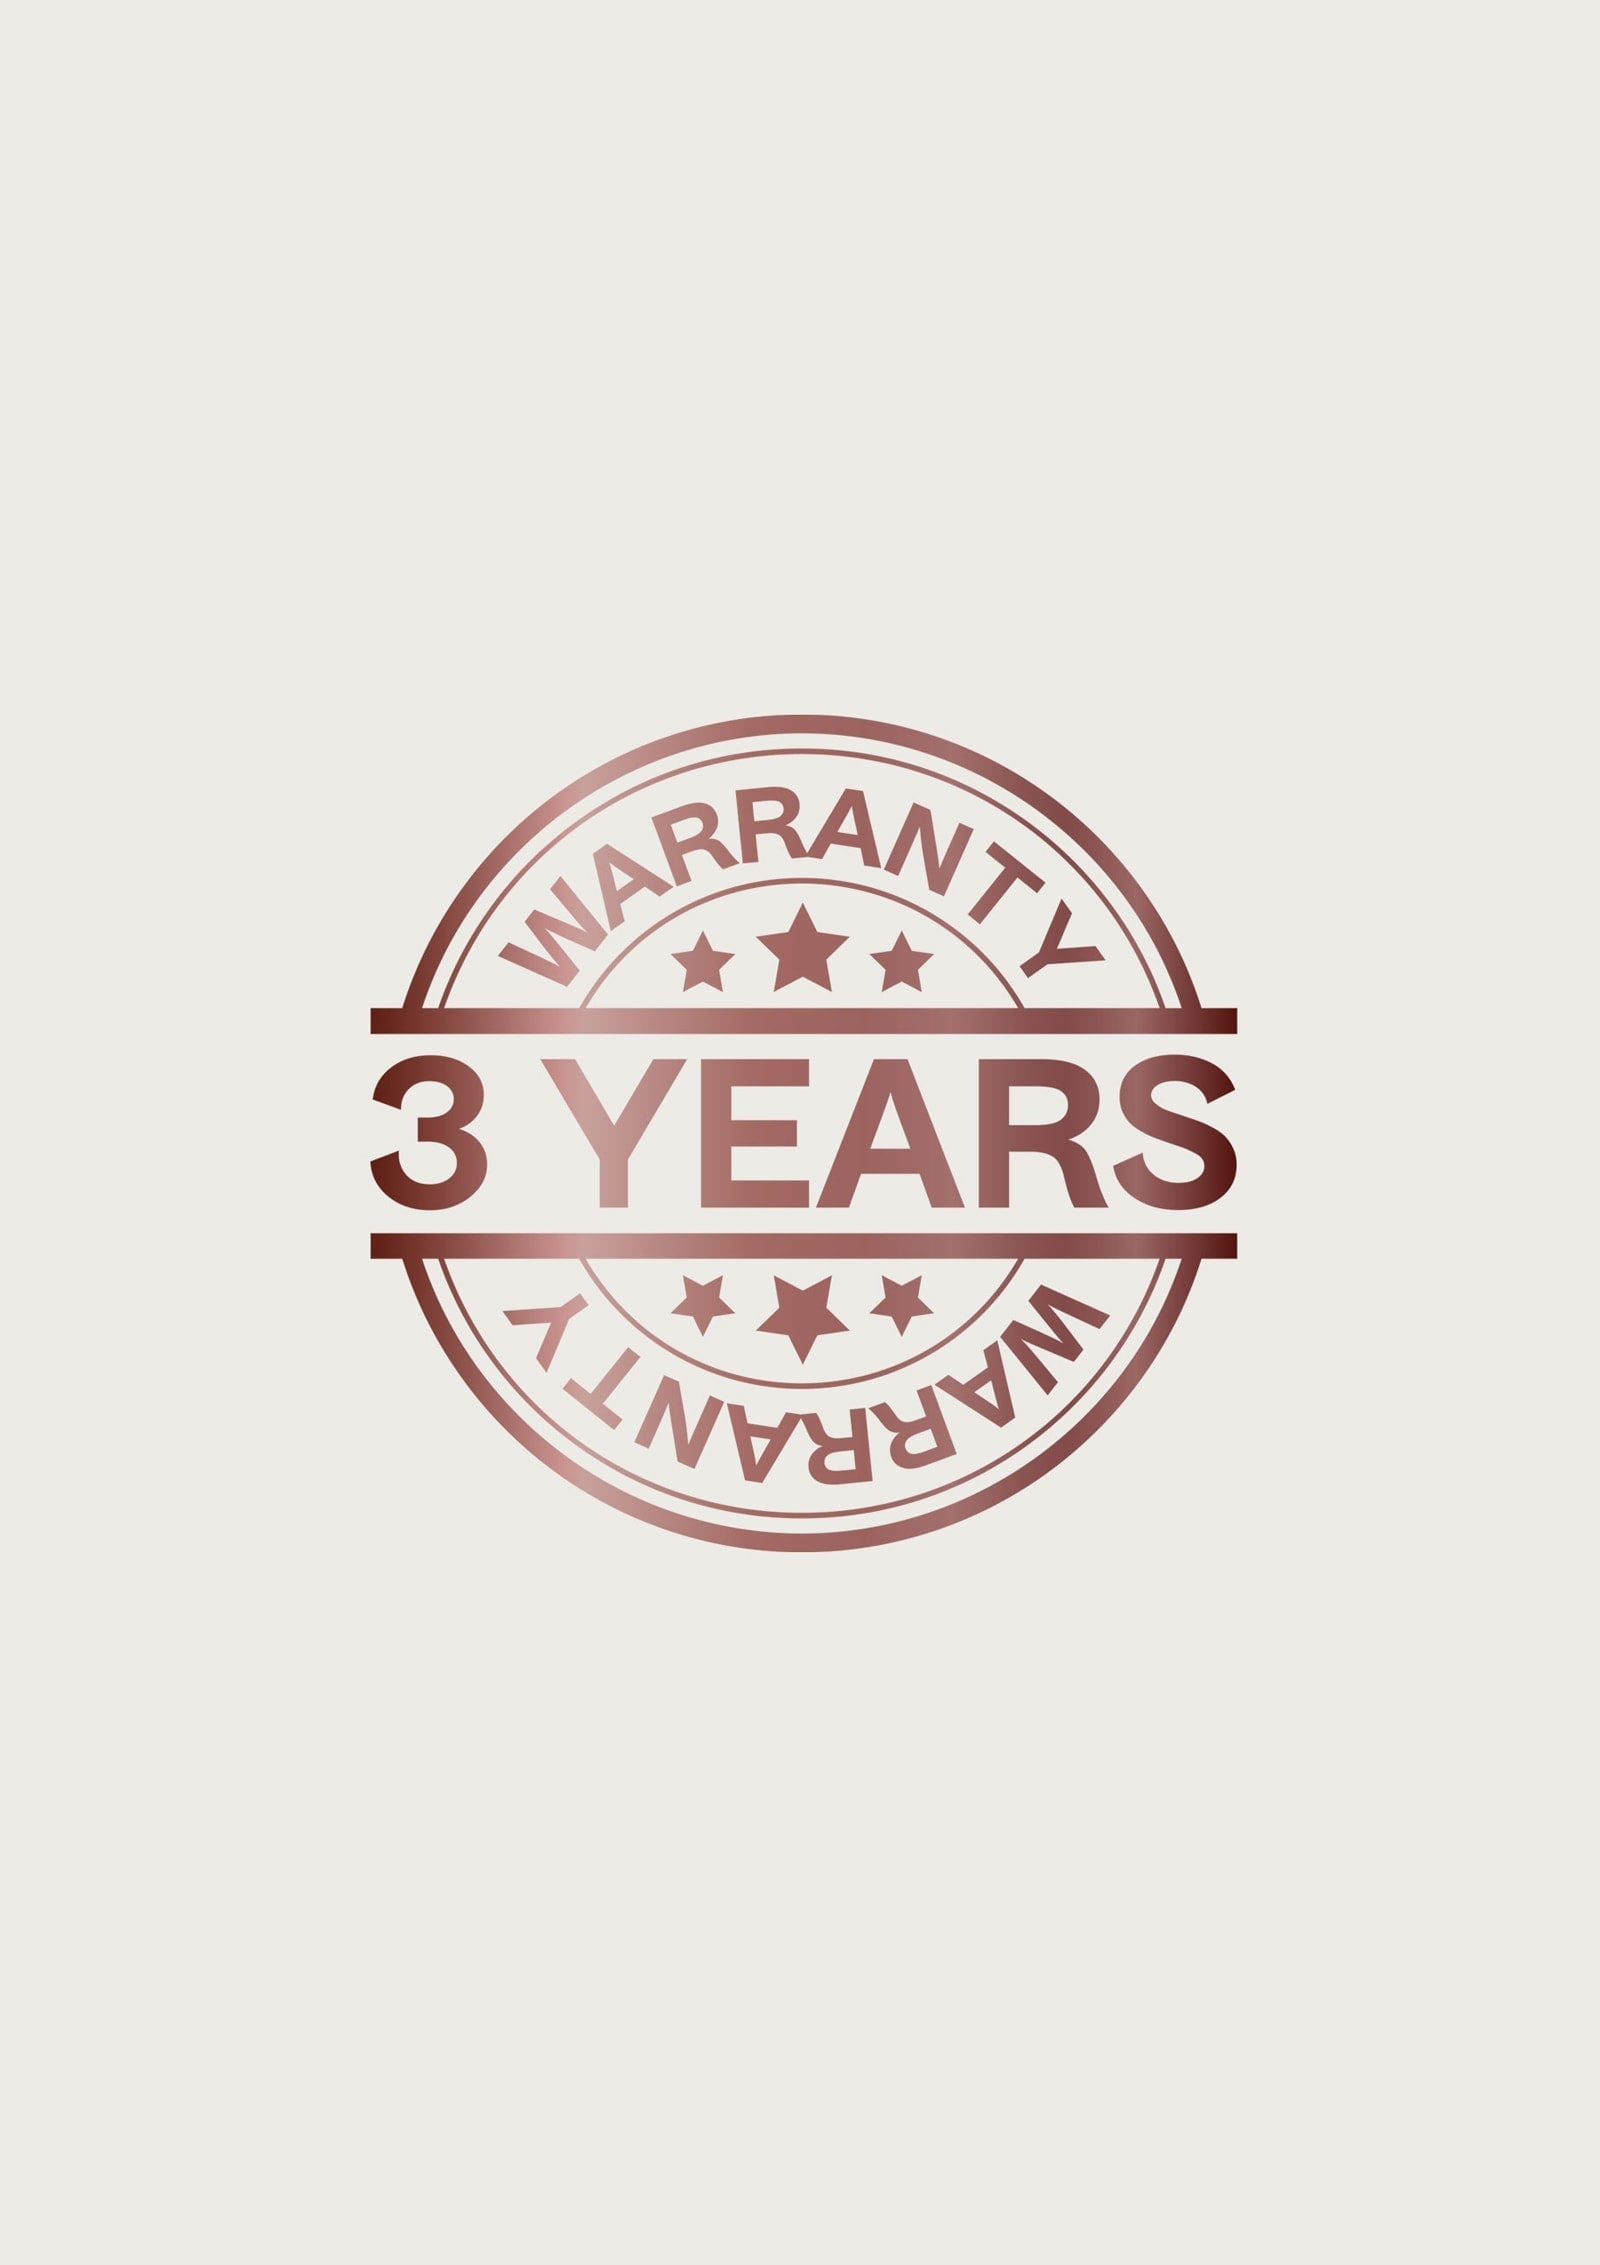 3 Years Extended Warranty